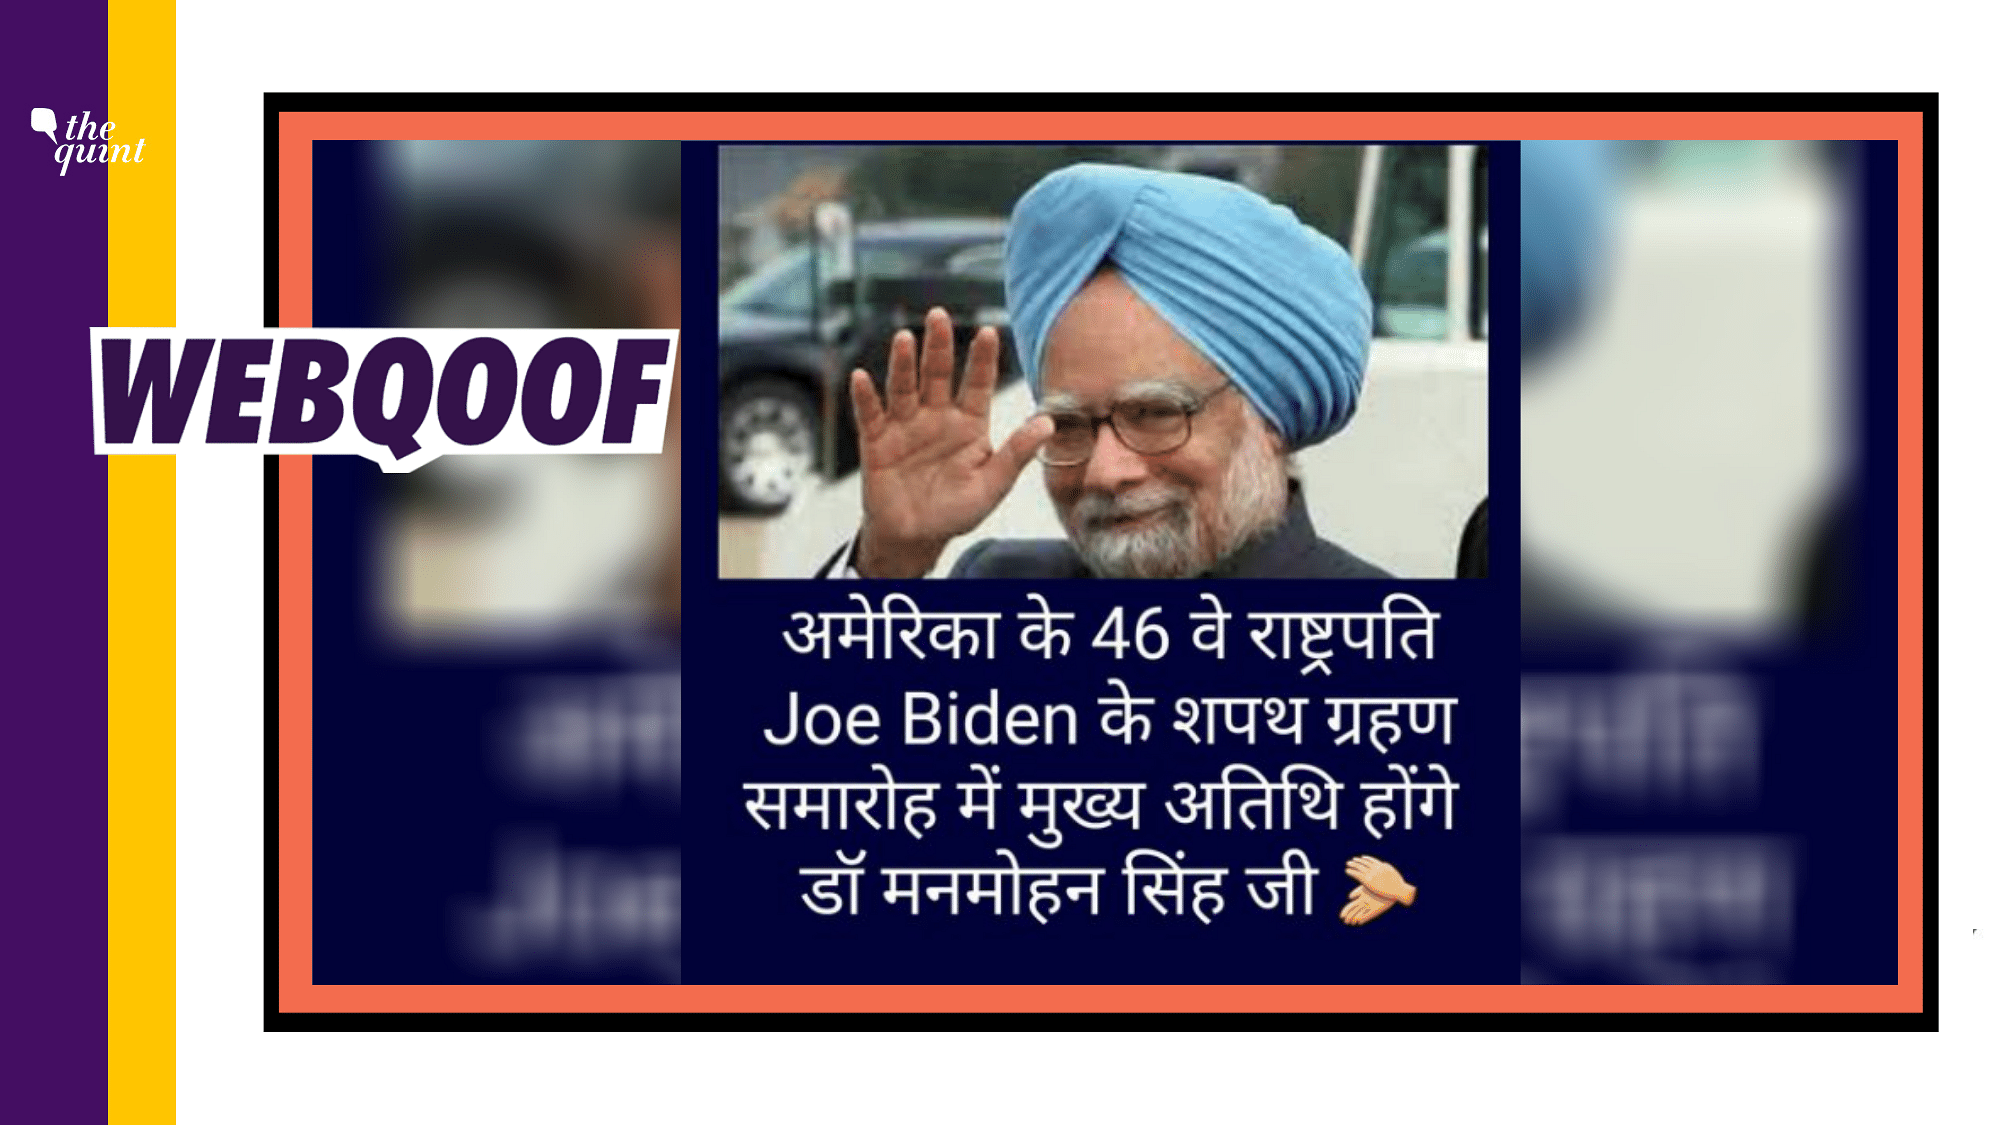 Several users on social media claimed that India’s former Prime Minister, Manmohan Singh has been invited as a chief guest for Biden’s swearing-in ceremony.